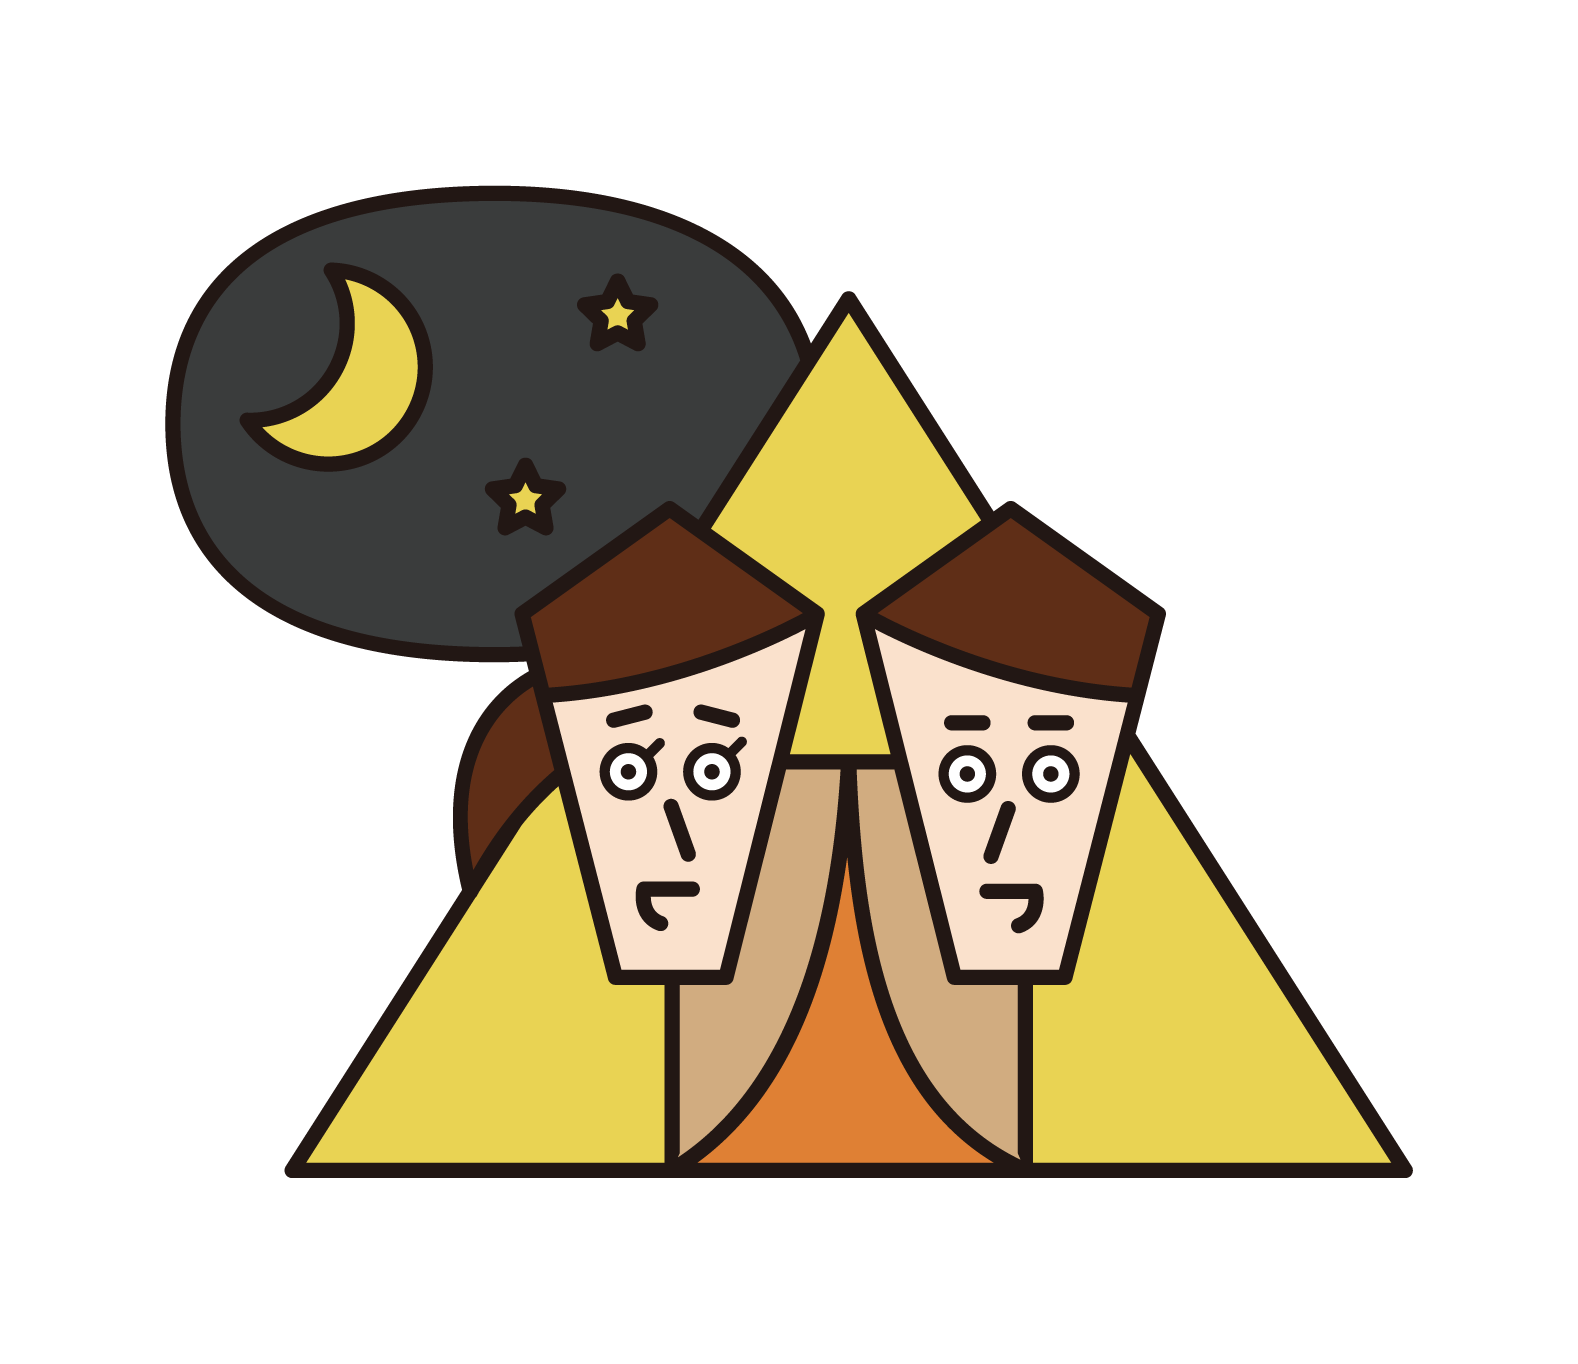 Illustration of a couple staying in a tent